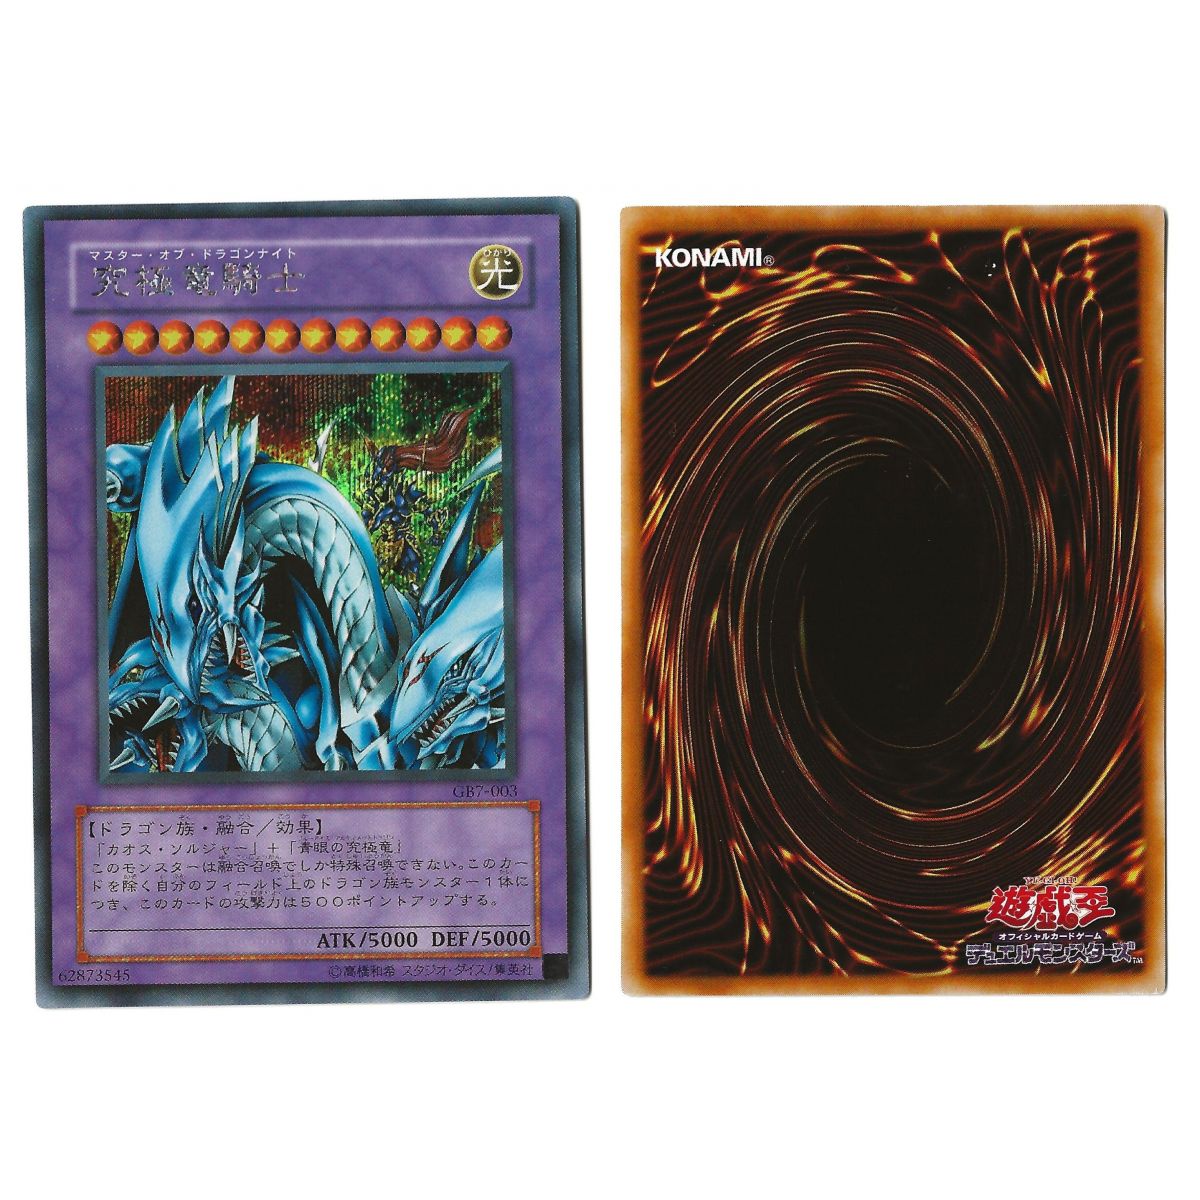 Dragon Master Knight GB7-003 Yu-Gi-Oh! Duel Monster 7: The Duel City Legend Promotional Cards Secret Rare Unlimited Japanese